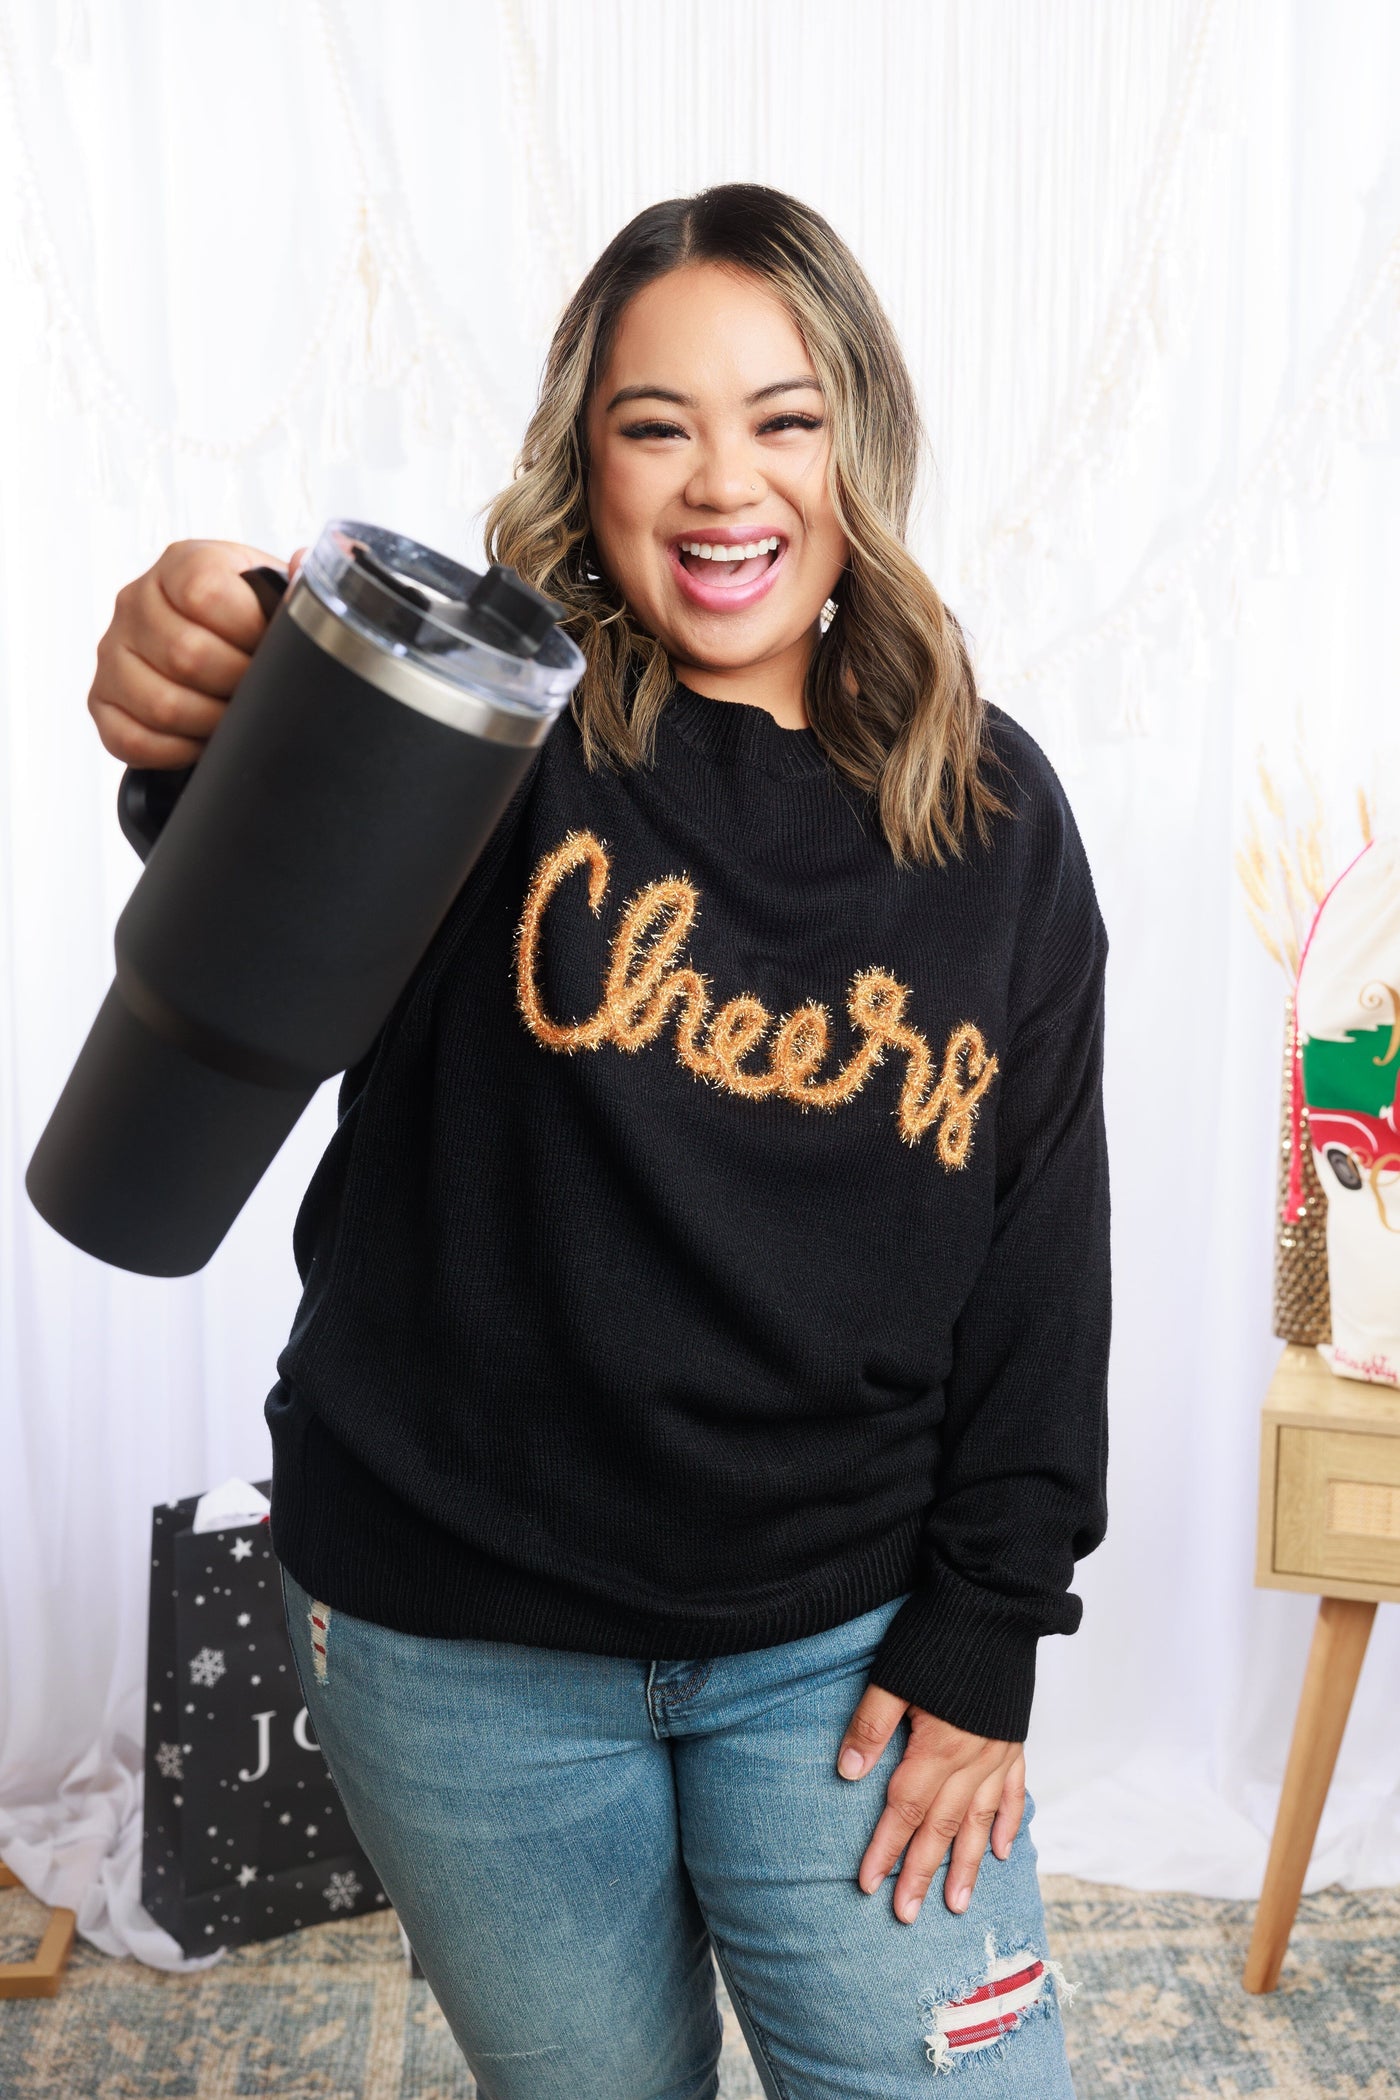 Cheers Knit Sweater Giftmas BS75 